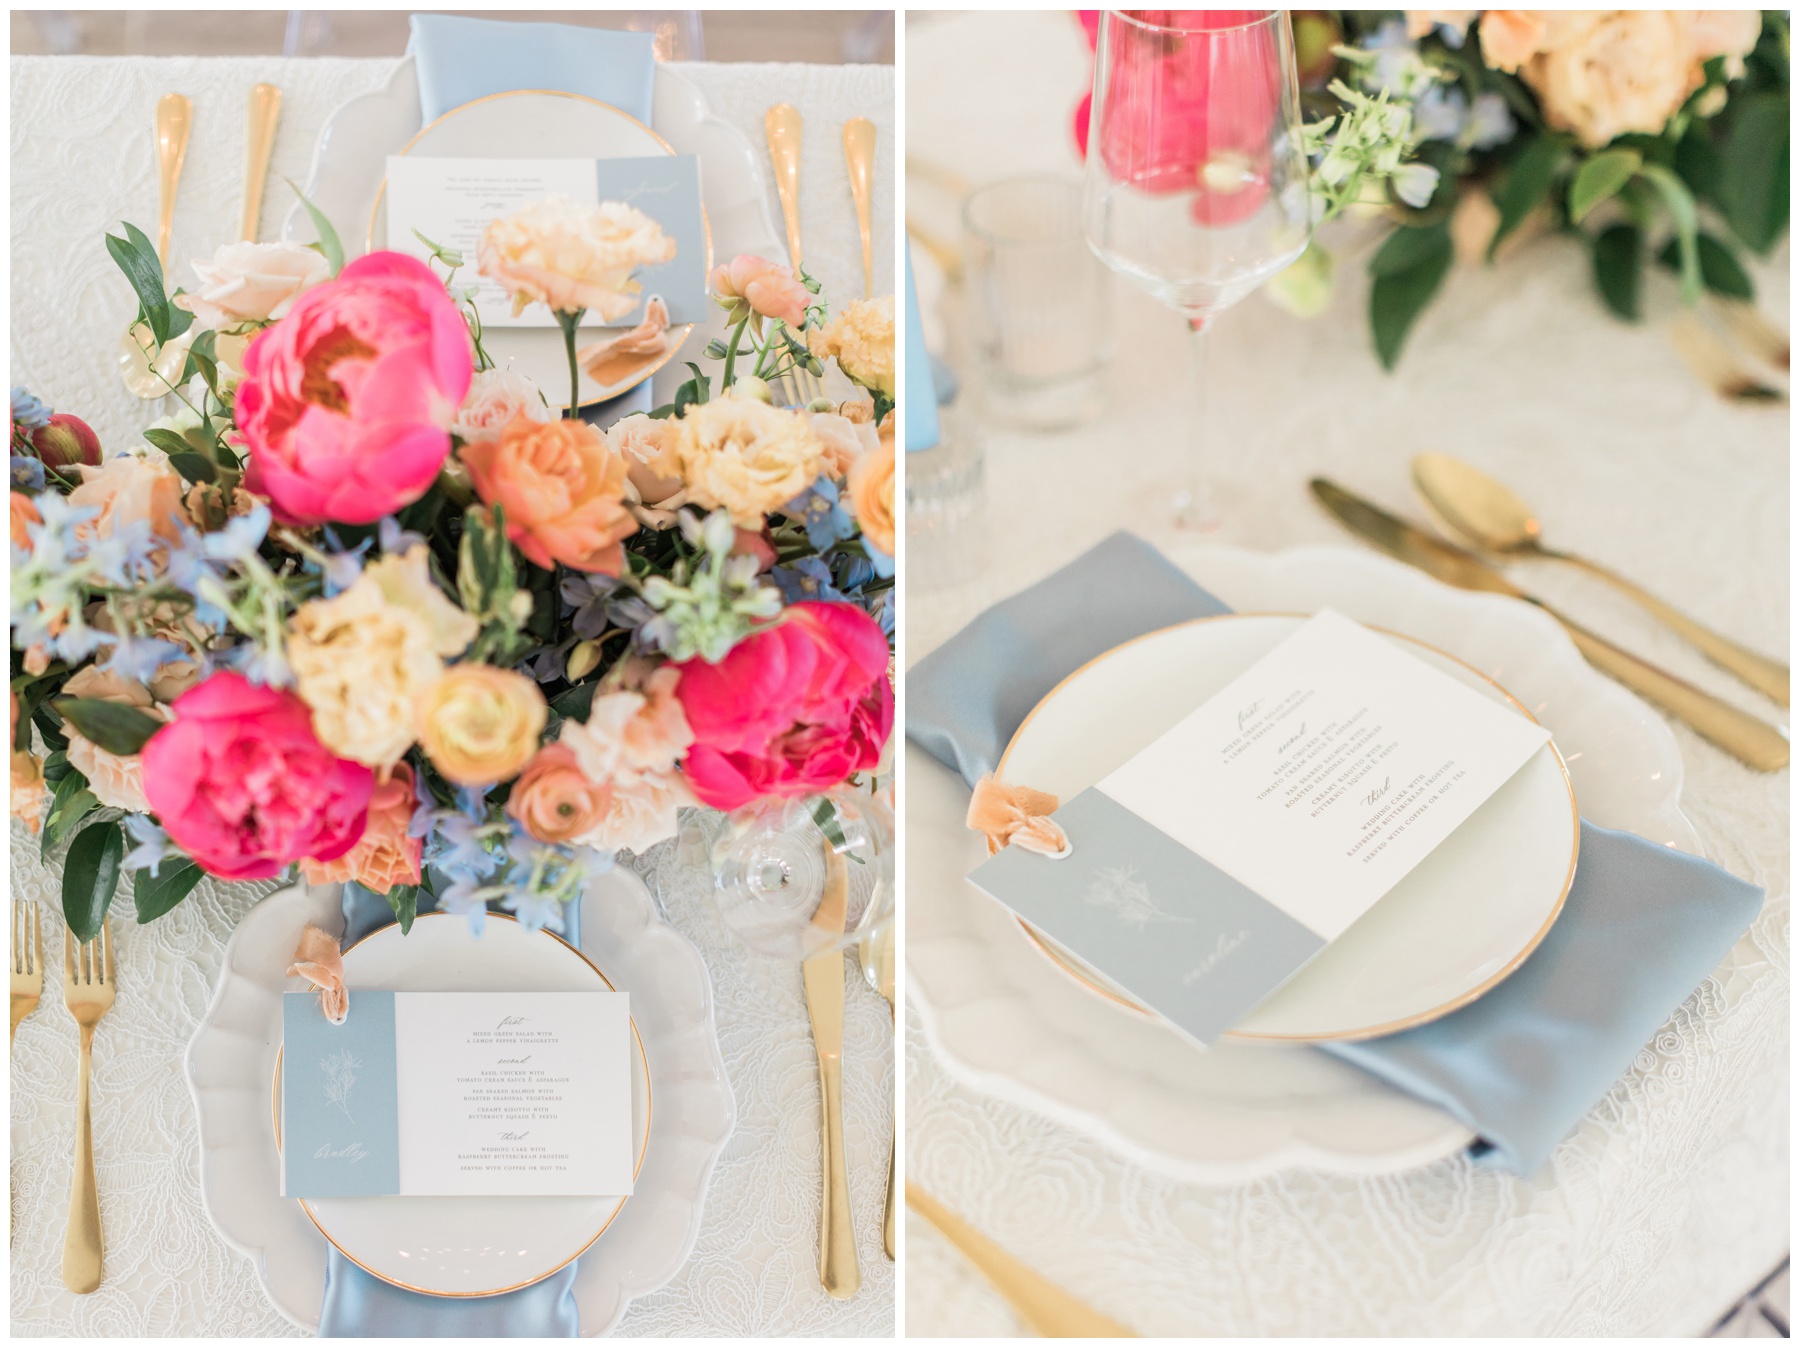 Dusty blue cloth napkins and fuchsia peonies for an indoor wedding reception 